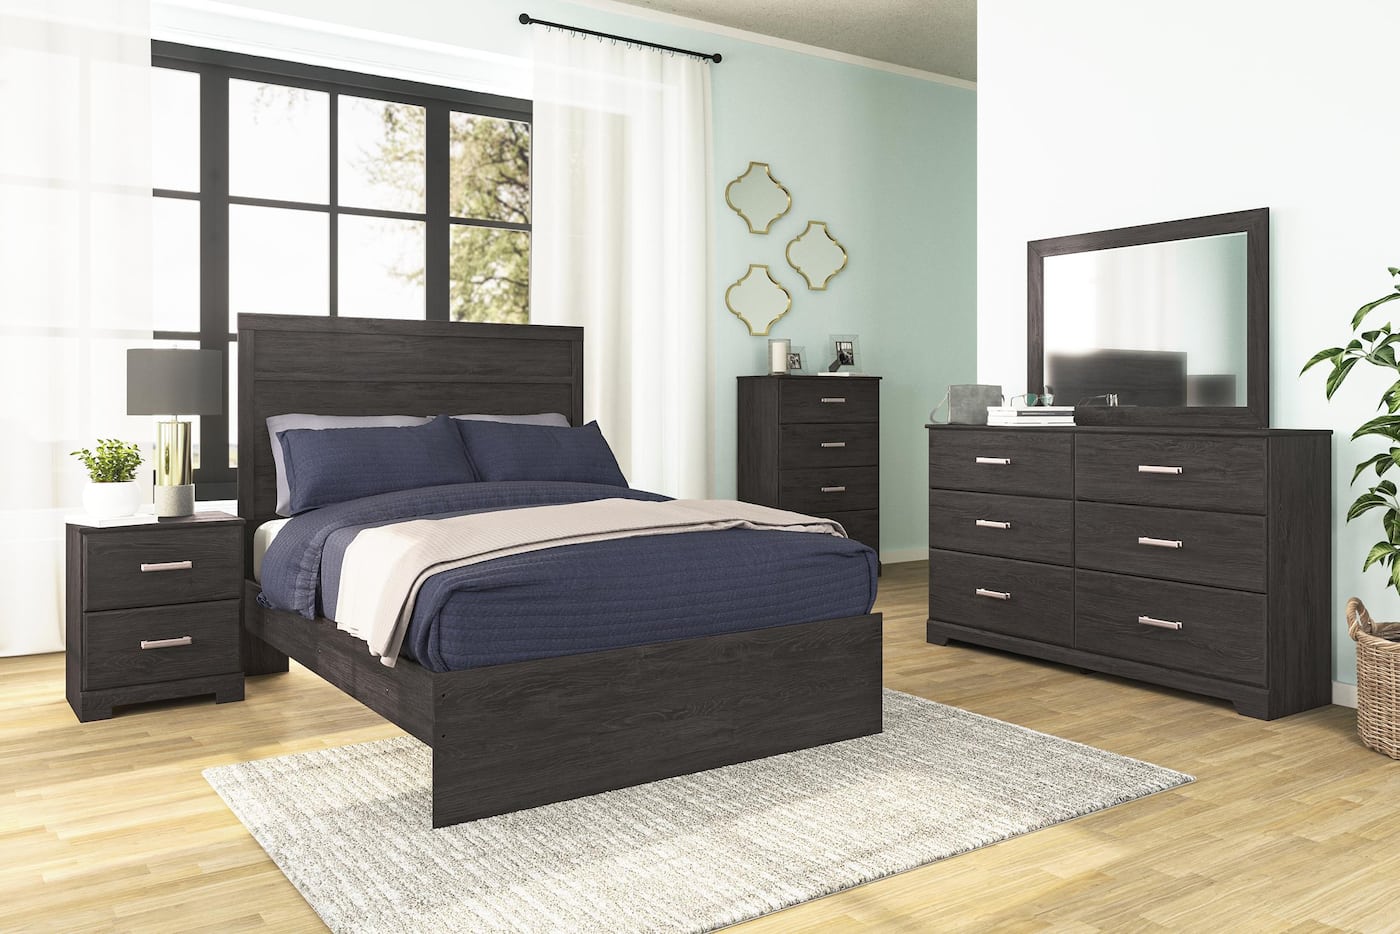 belachime youth bedroom collection bpc  